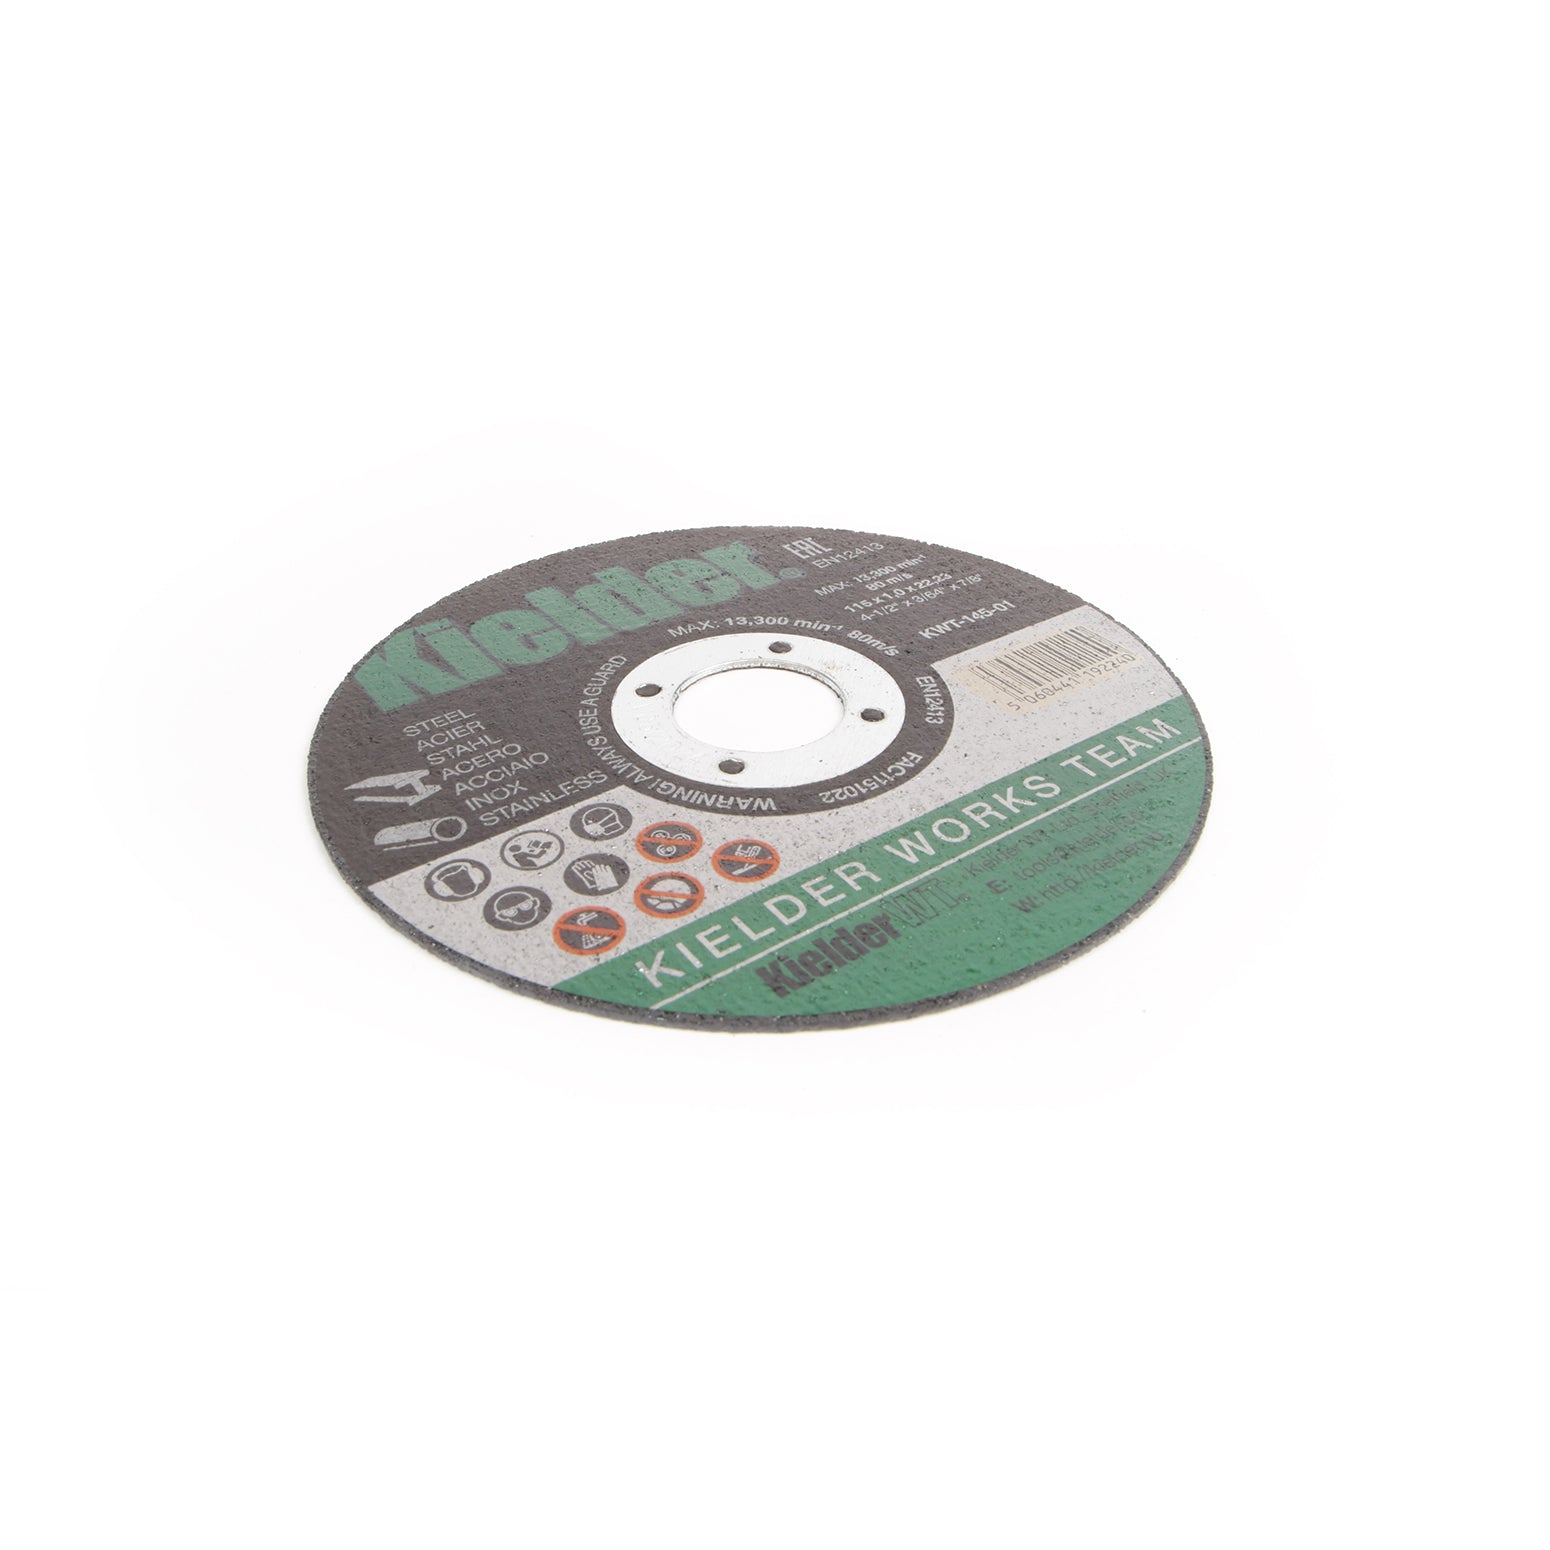 Types of Angle Grinder Wheels and Discs